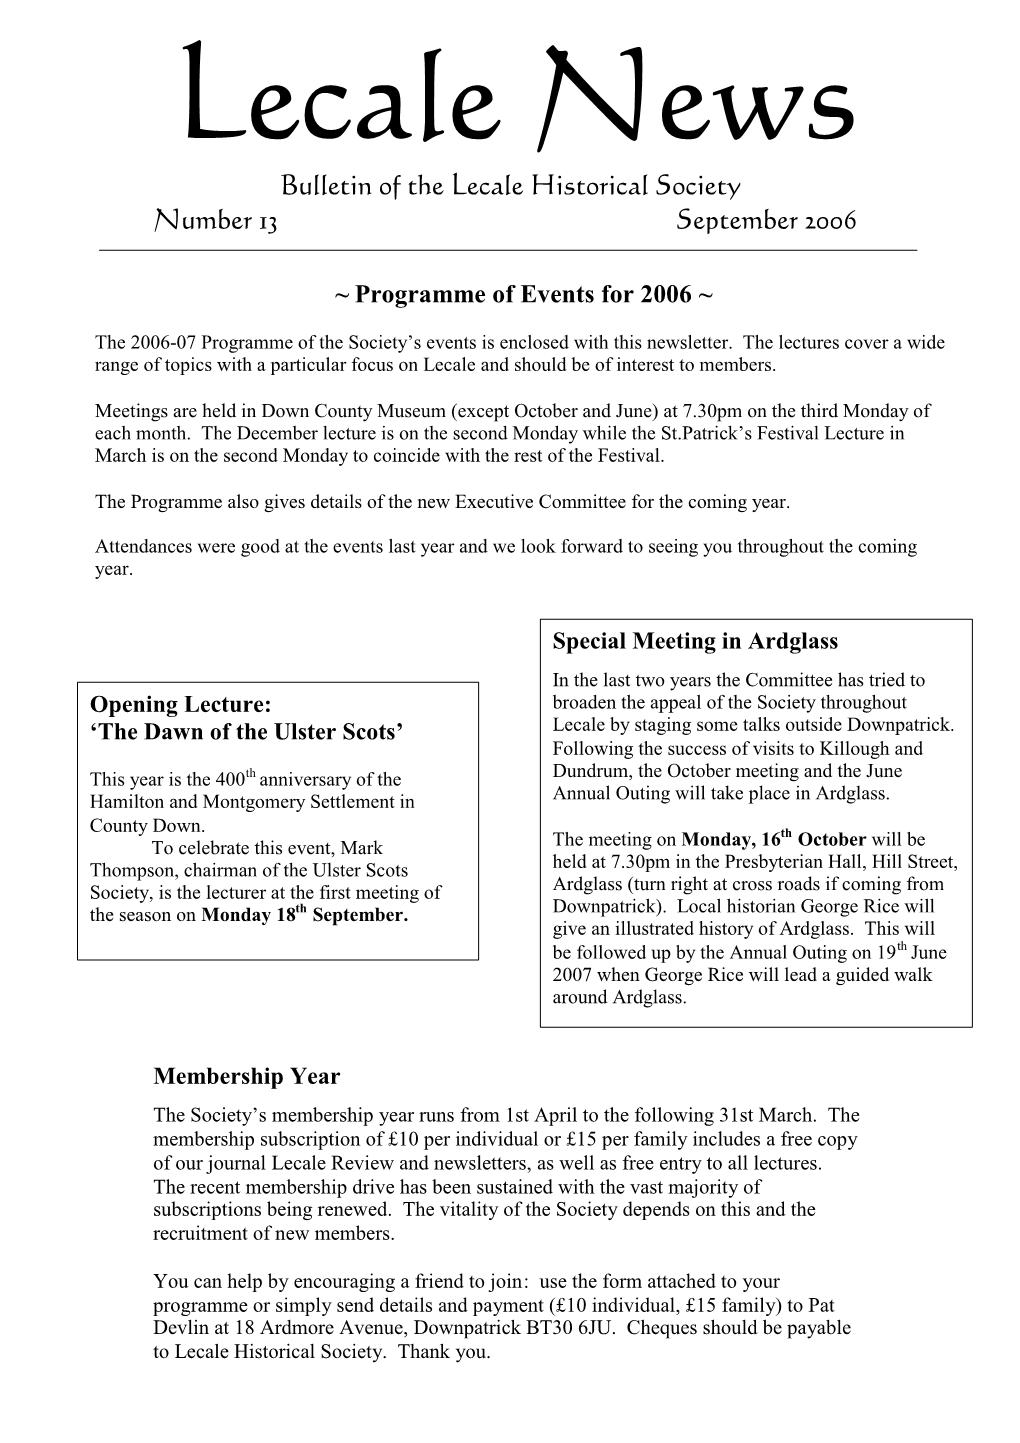 Bulletin of the Lecale Historical Society Number 13 September 2006